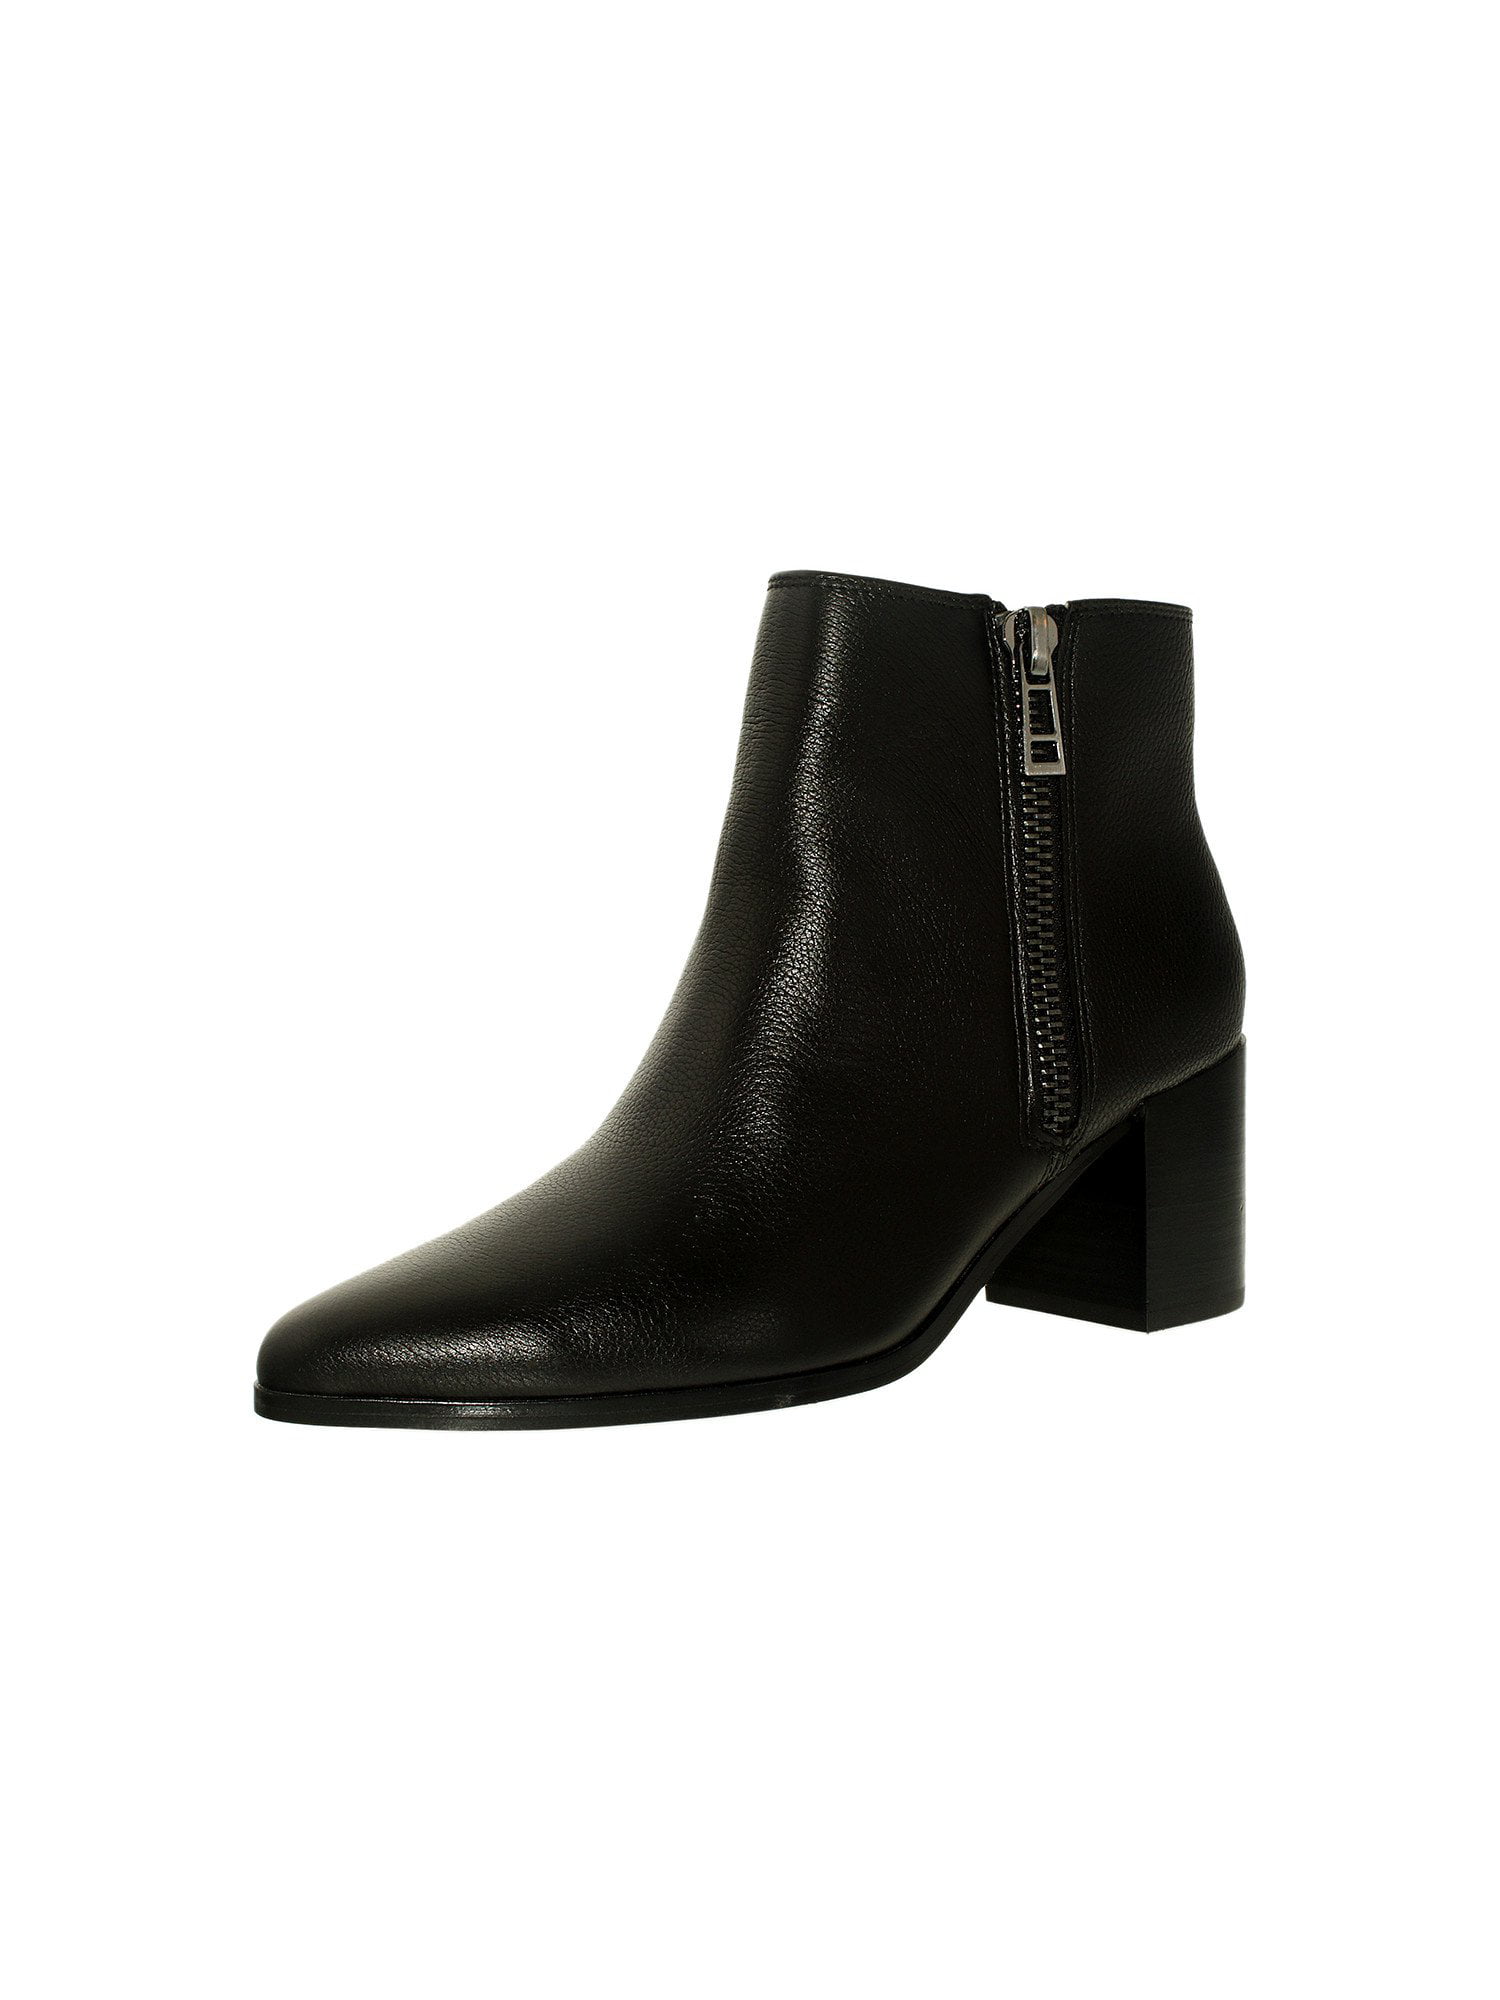 Charles By David Women's Uma Leather Black Ankle-High Boot - 8.5M ...